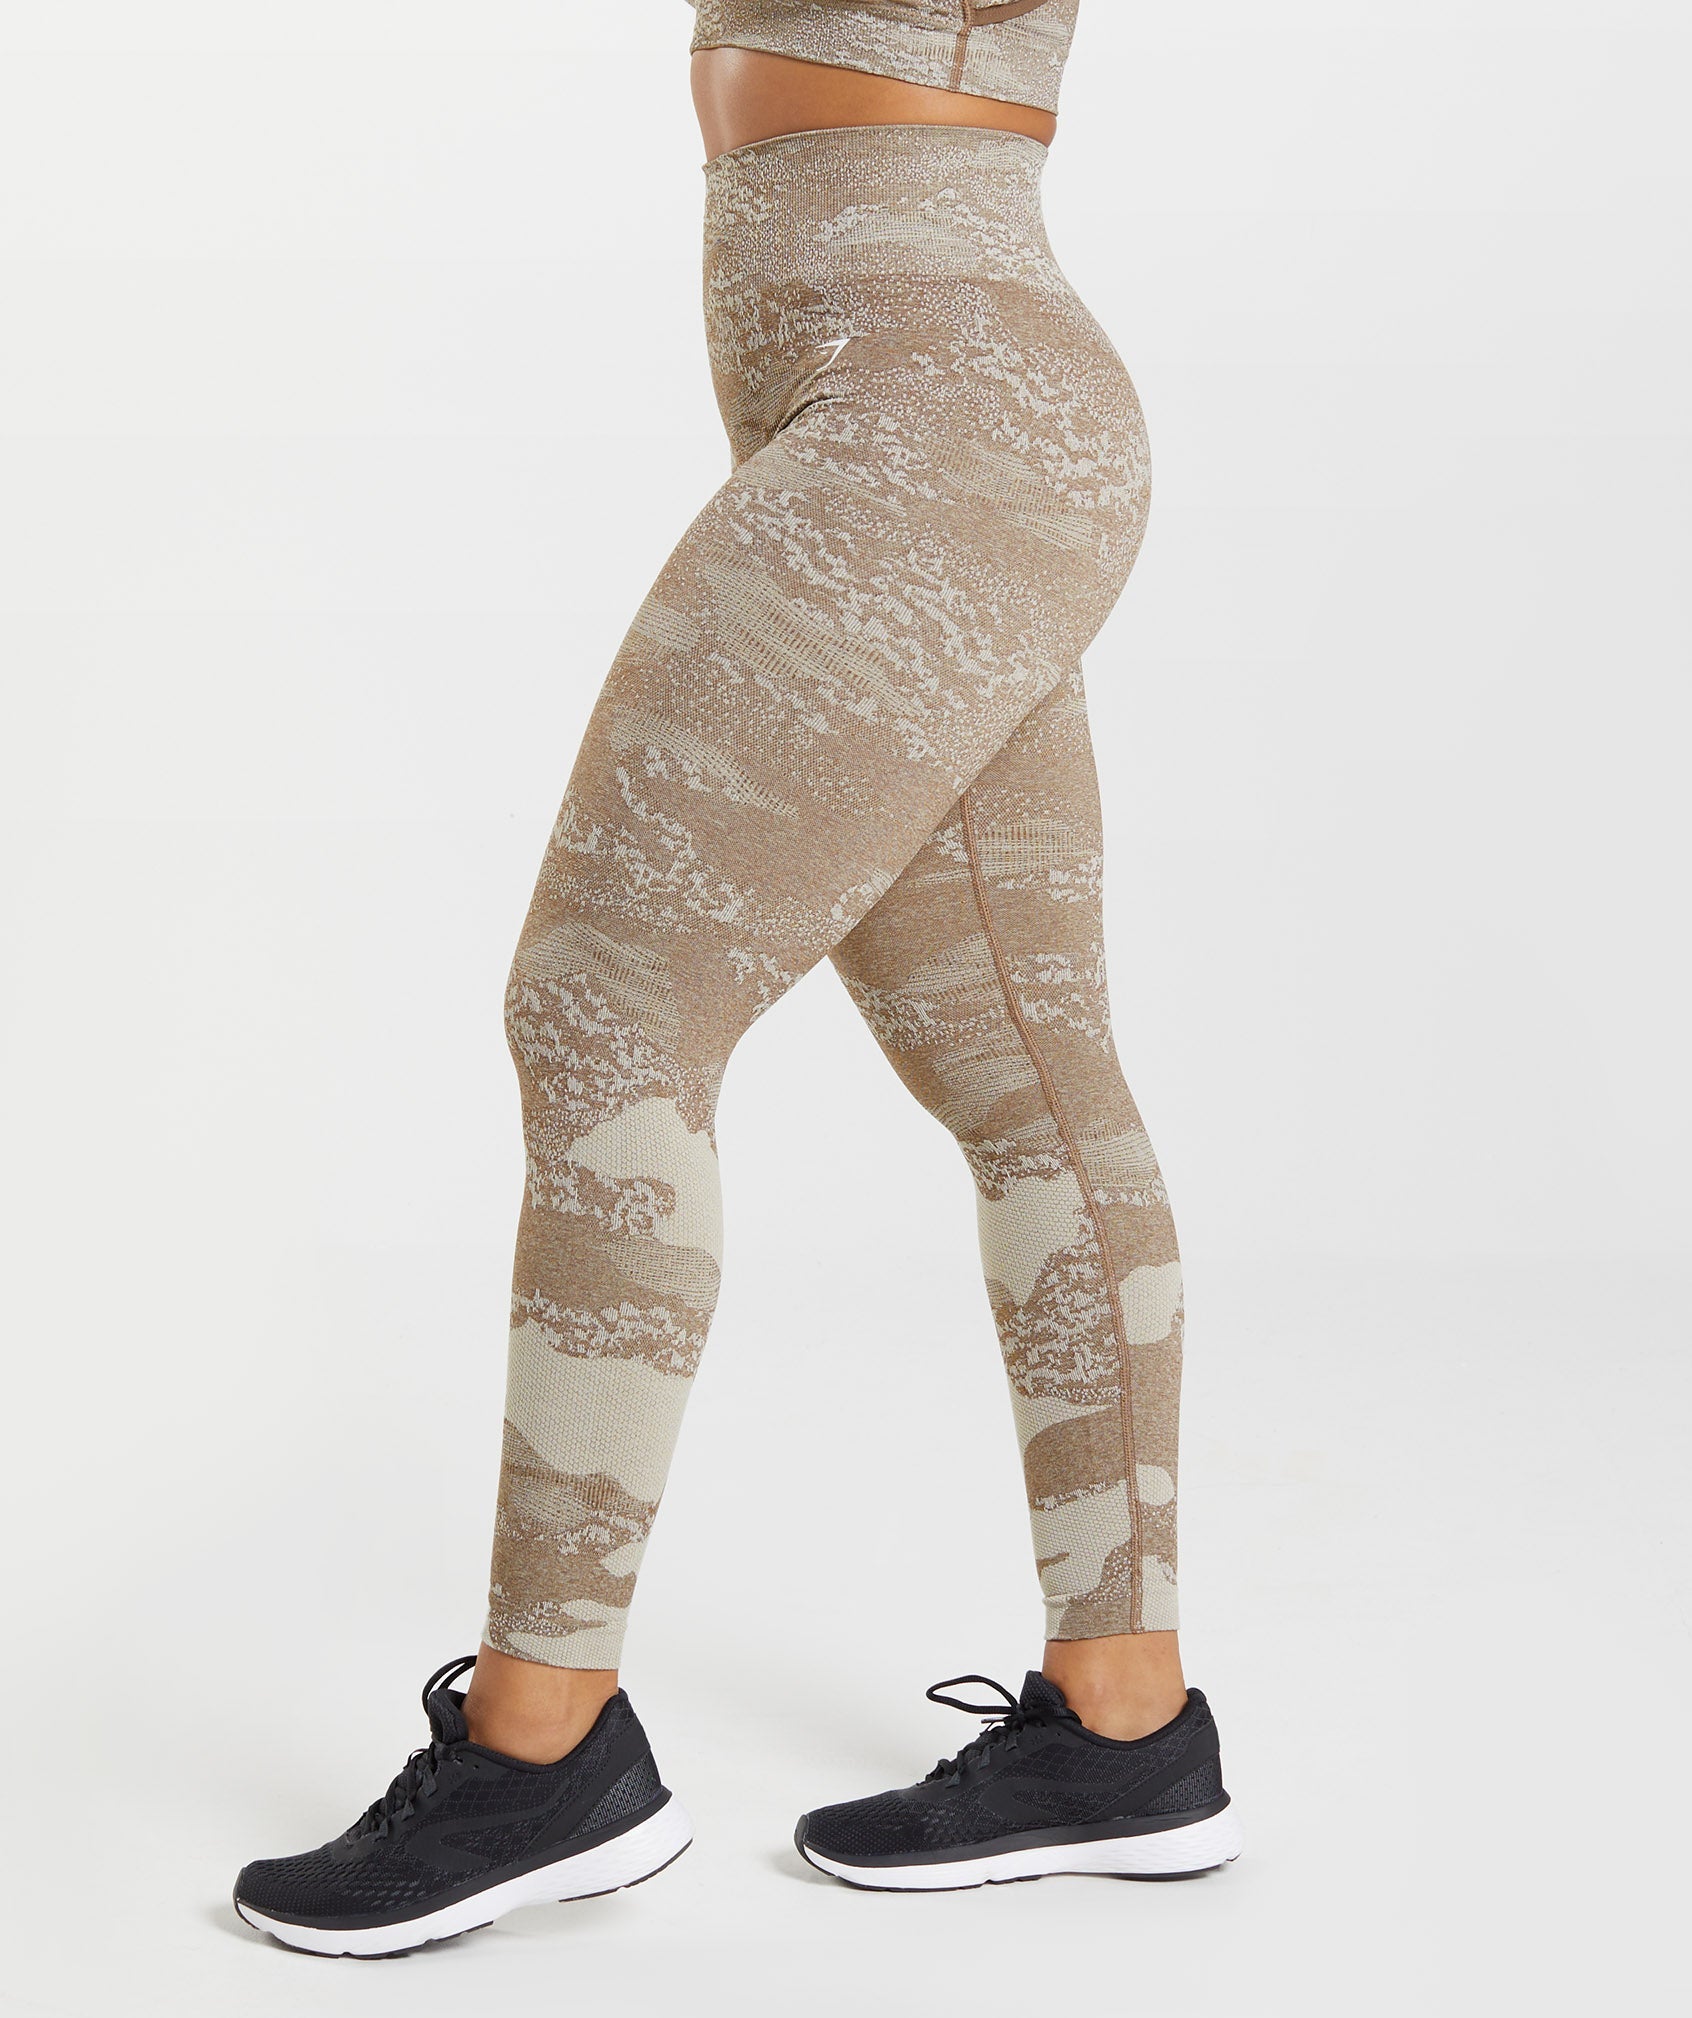 Gymshark Camo Seamless Leggings - Size Medium – Chic Boutique Consignments